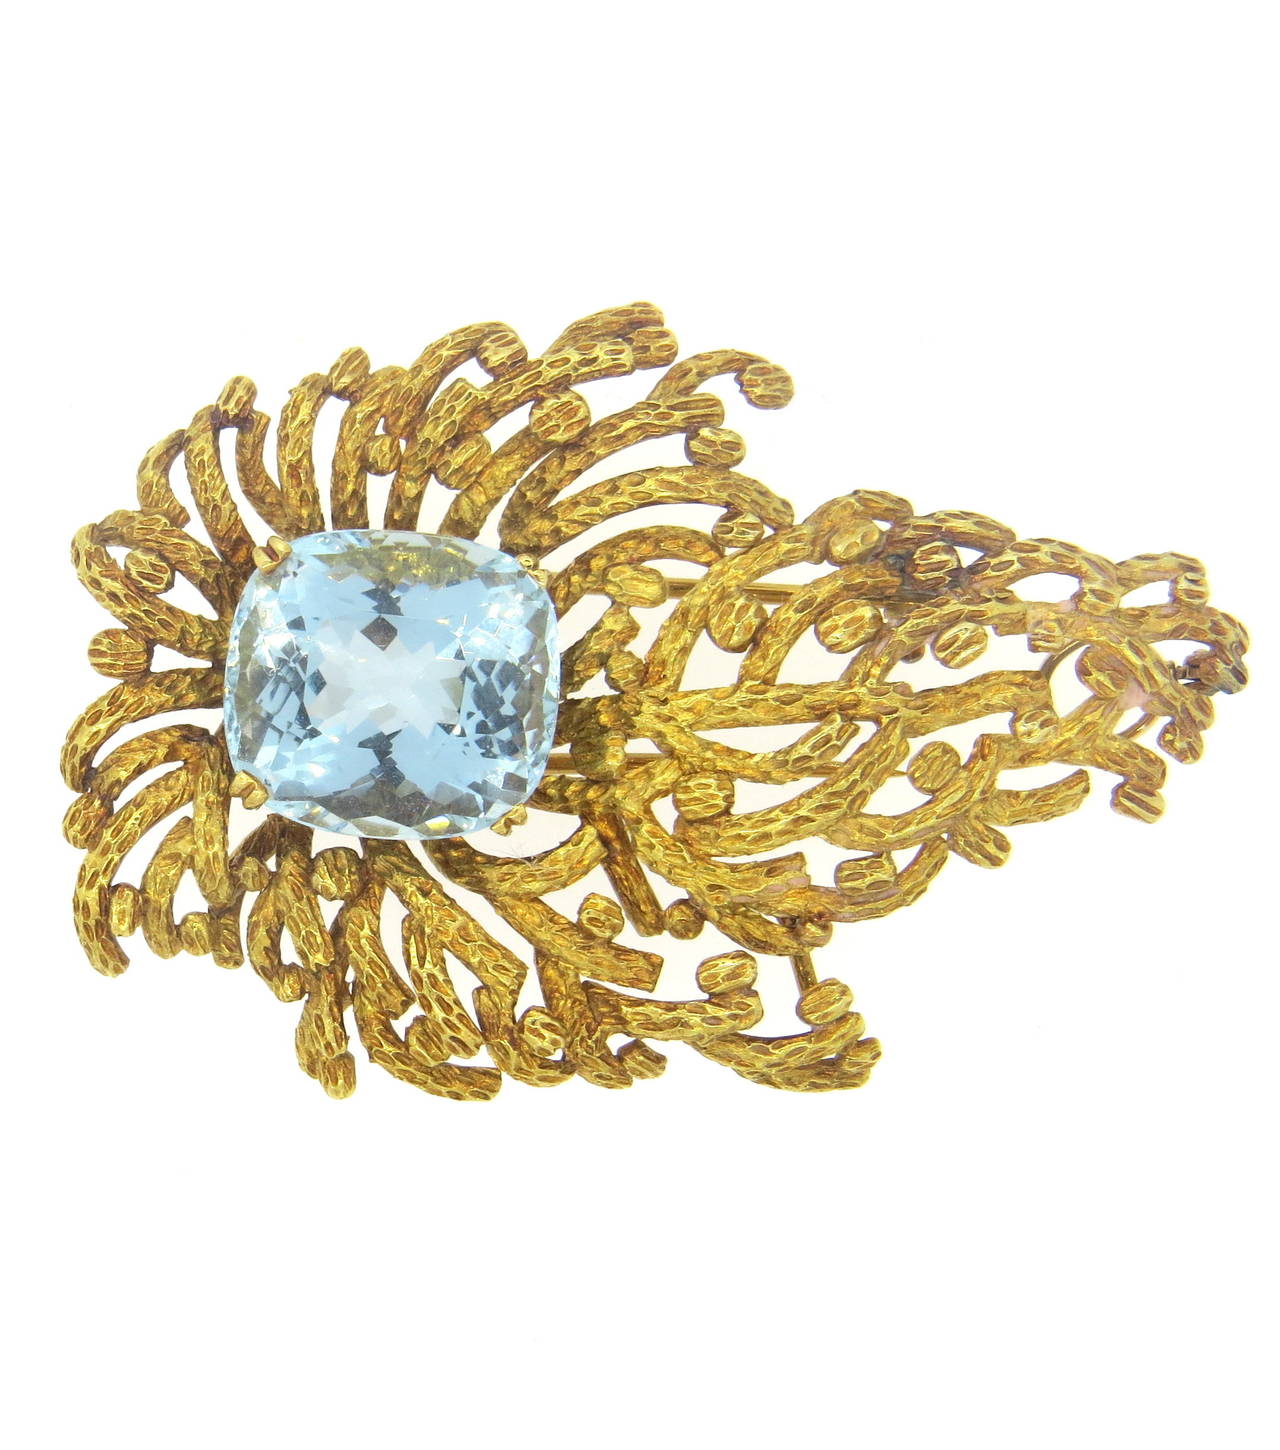 Vintage 18k gold brooch, featuring 17.5mm x 16.1mm 12mm aquamarine gemstone - approximately 18.5 -20.00ct . Brooch can be also worn as a pendant. Measures 65mm x 45m. Weight of the piece - 33.9 grams